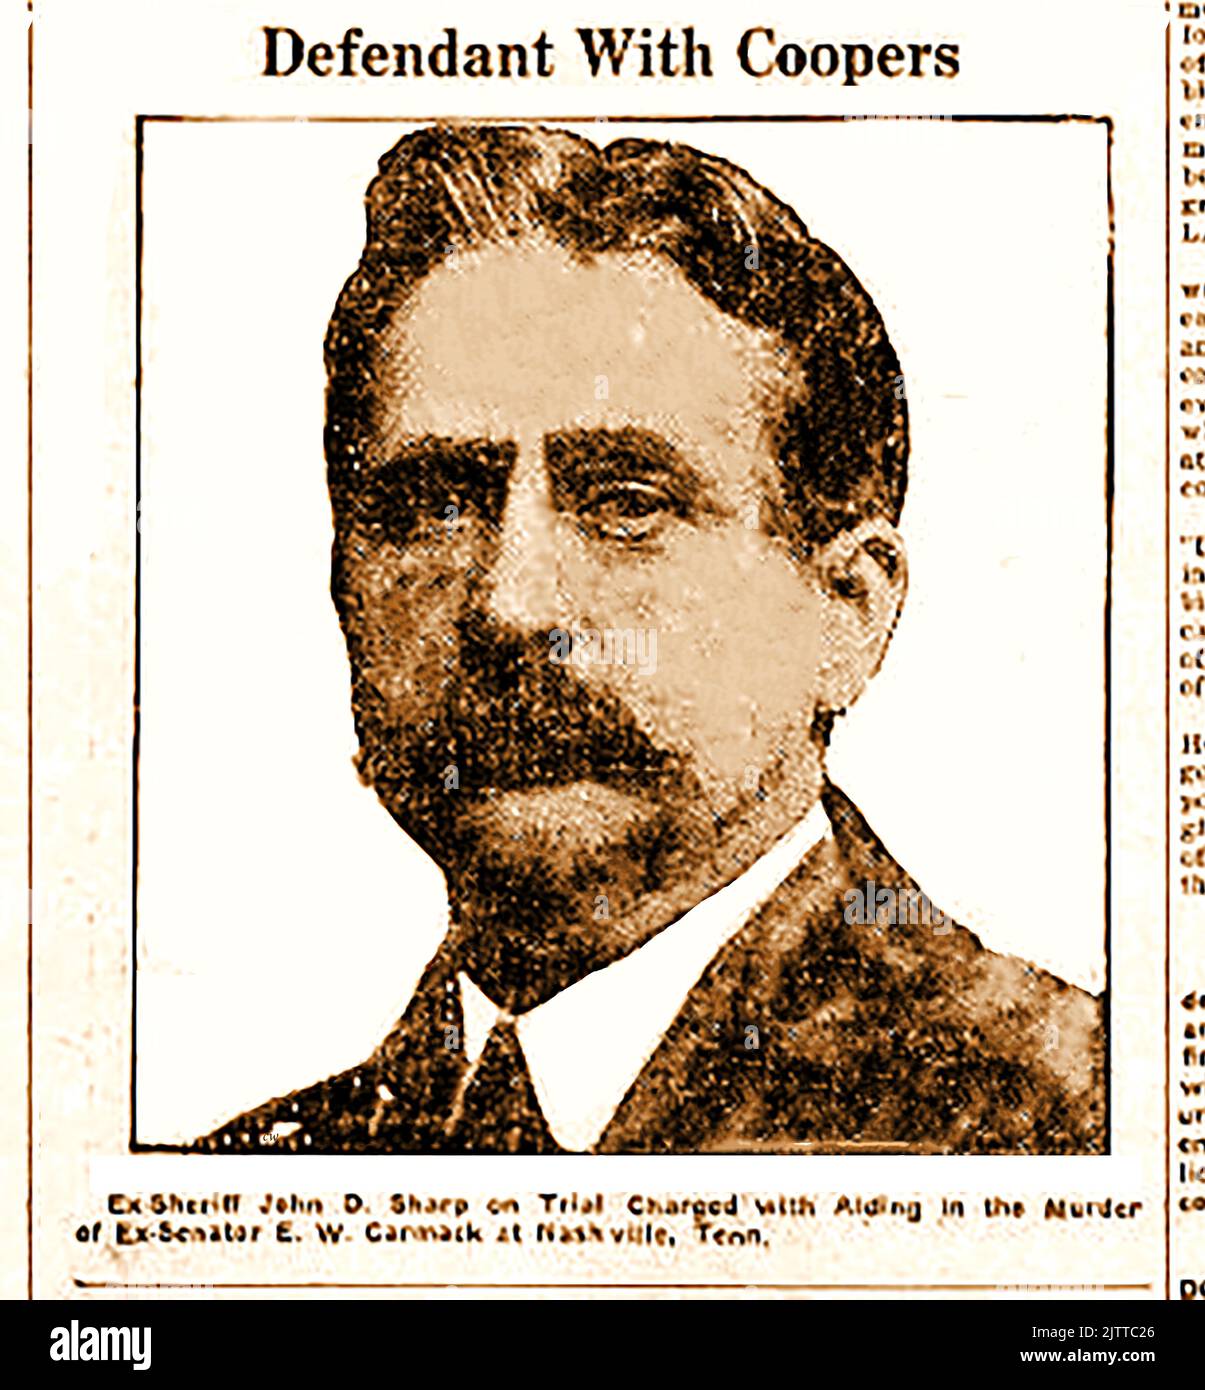 A 1909 newspaper portrait of ex-sheriff John D Sharp charged for involvement in the murder of senator Edward Ward Carmack  at Nashville, Tennessee, USA  . On the 9th November 1908, former senator & congressman Carmack was shot in the street by young attorney Robin Cooper, son of Colonel Duncan Cooper a politician, both political enemies. Both were accused of premeditated  murder. Ex Sheriff John D Sharp was later accused of being complicit in  the murder because he had been with the Coopers immediately before the murder and allegedly knew of the plan to kill Carmack. Stock Photo